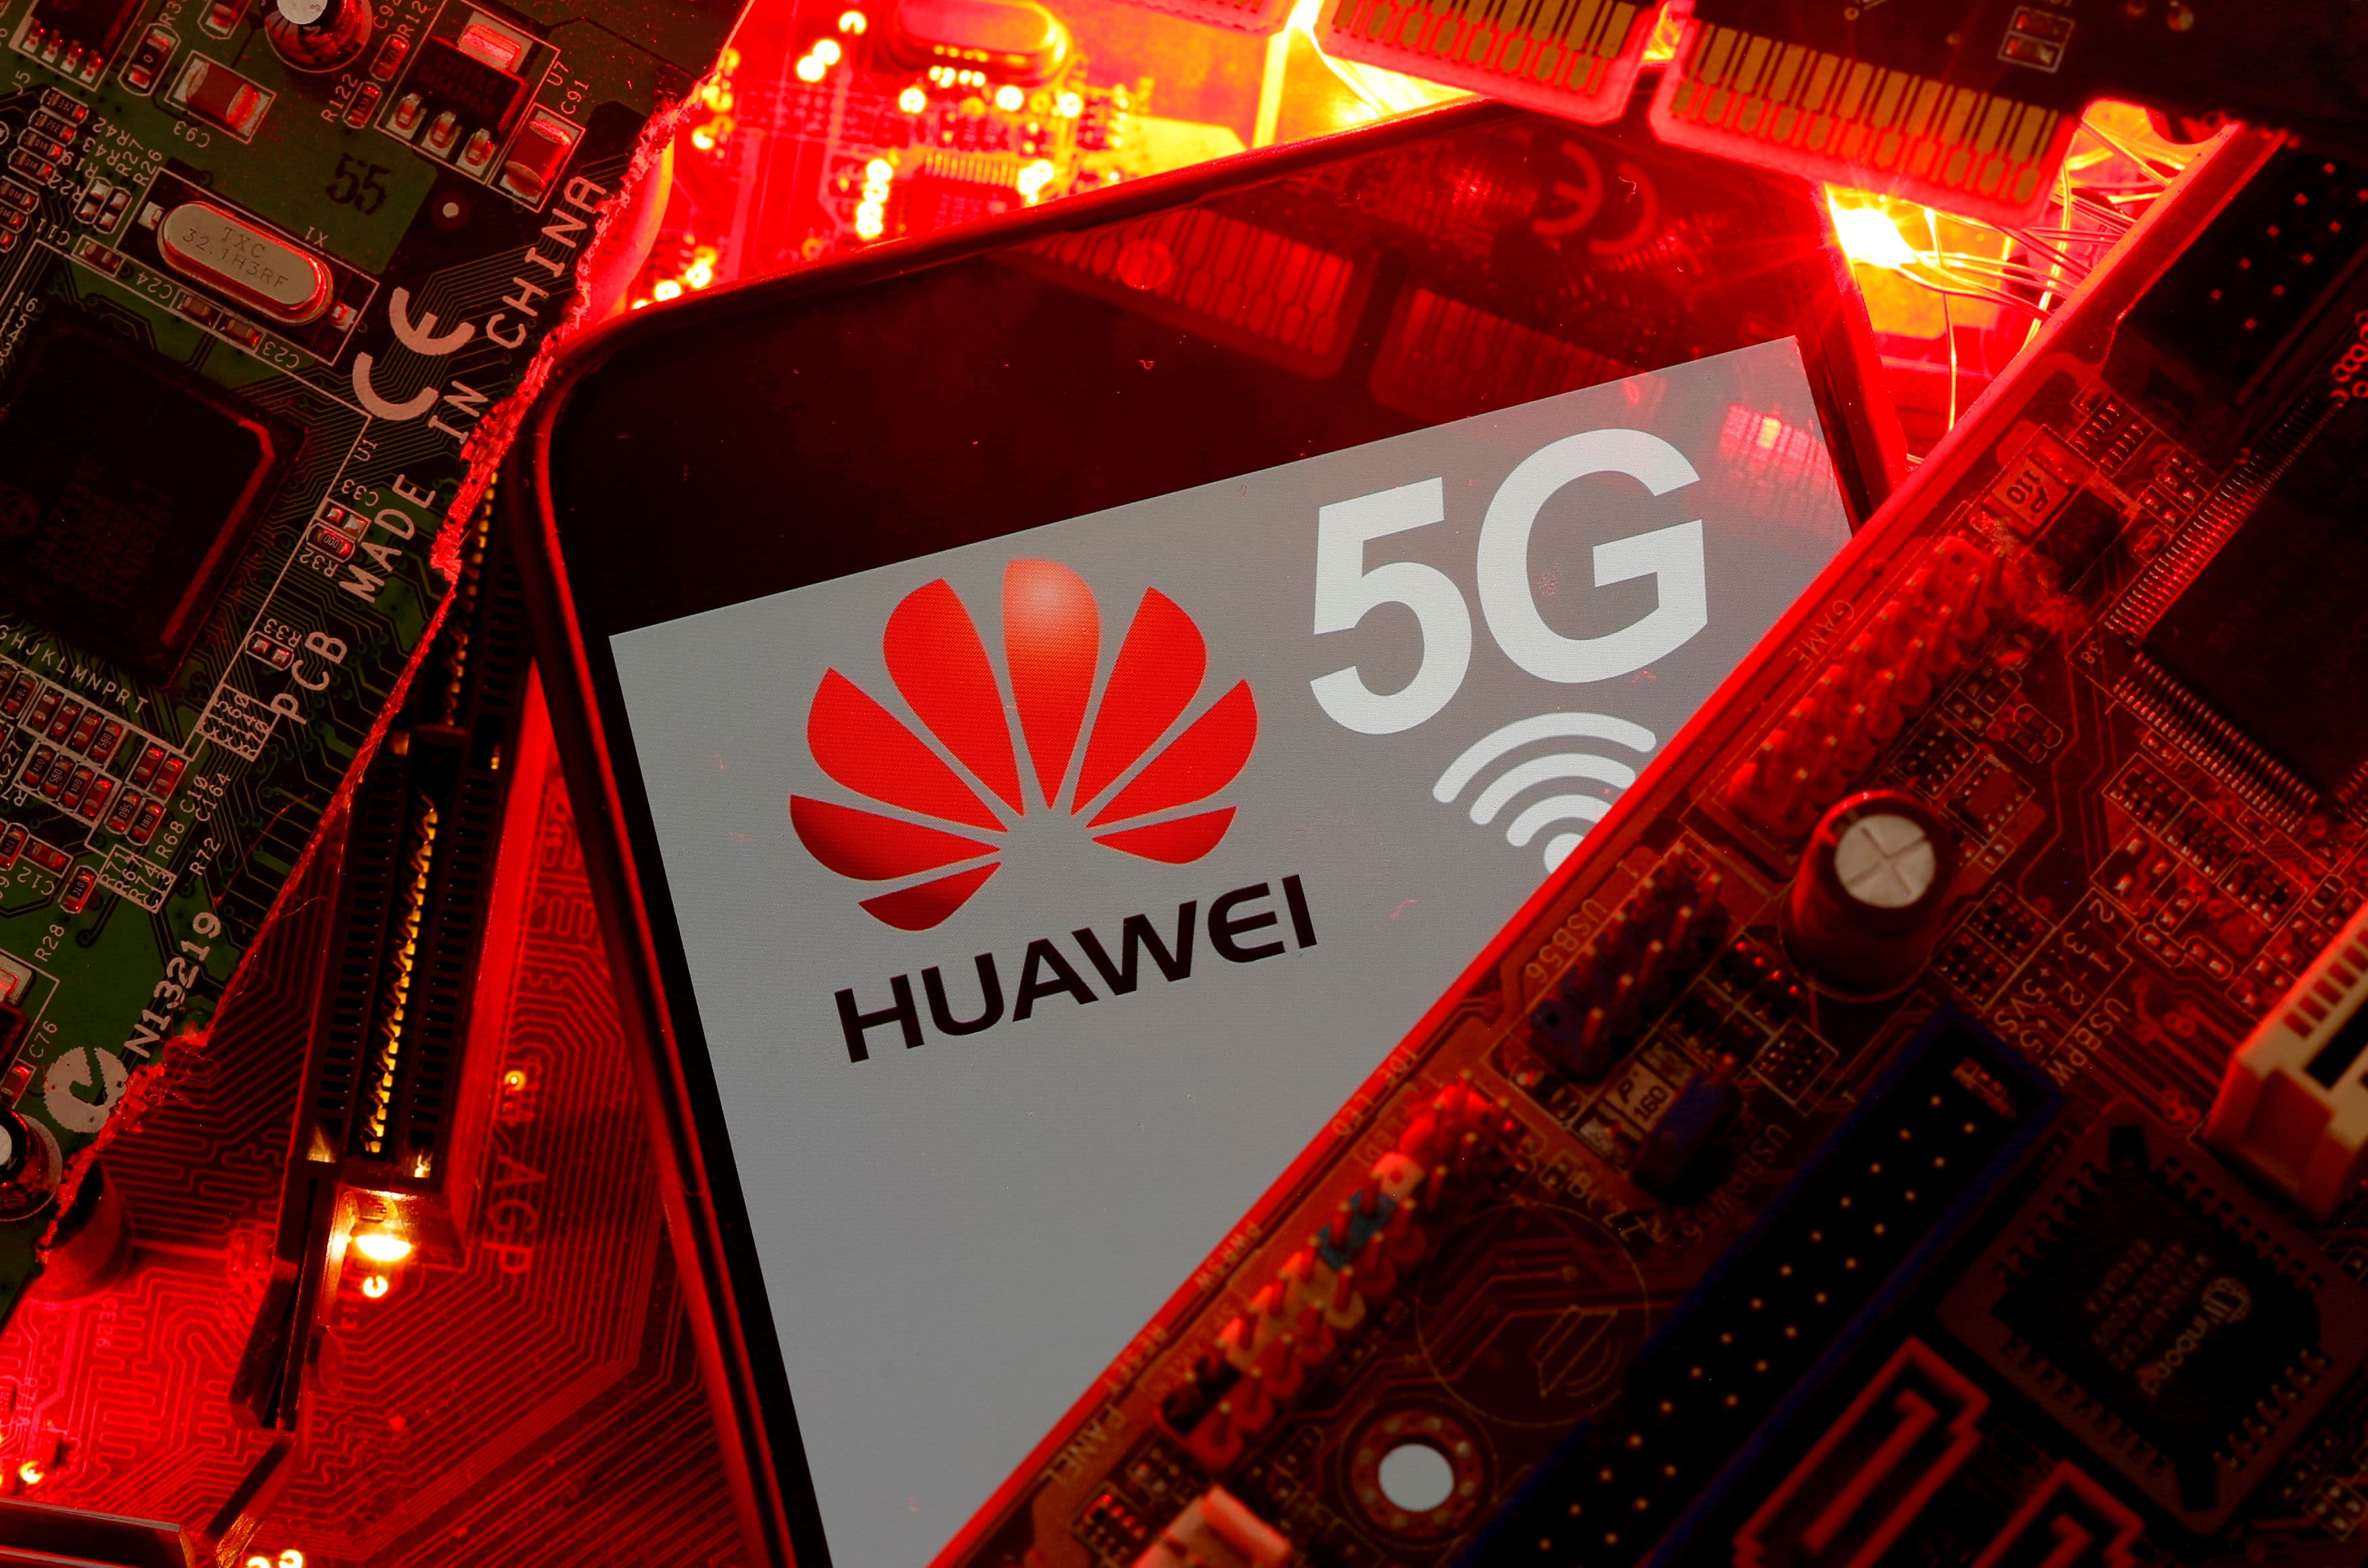 Huawei will charge royalties to smartphone makers that use its 5G technology